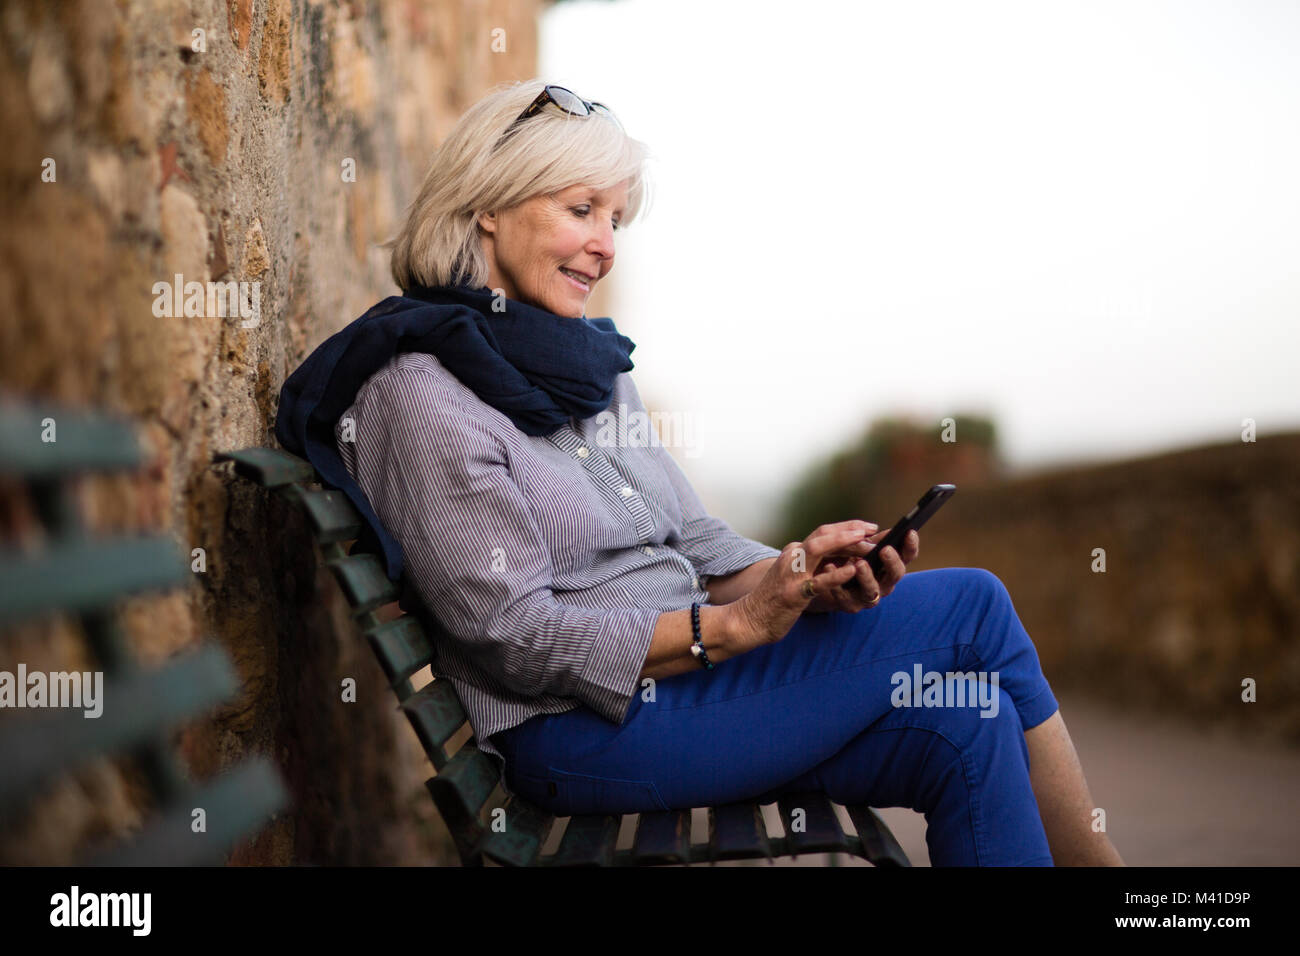 Senior woman relaxing on a bench using smartphone Stock Photo